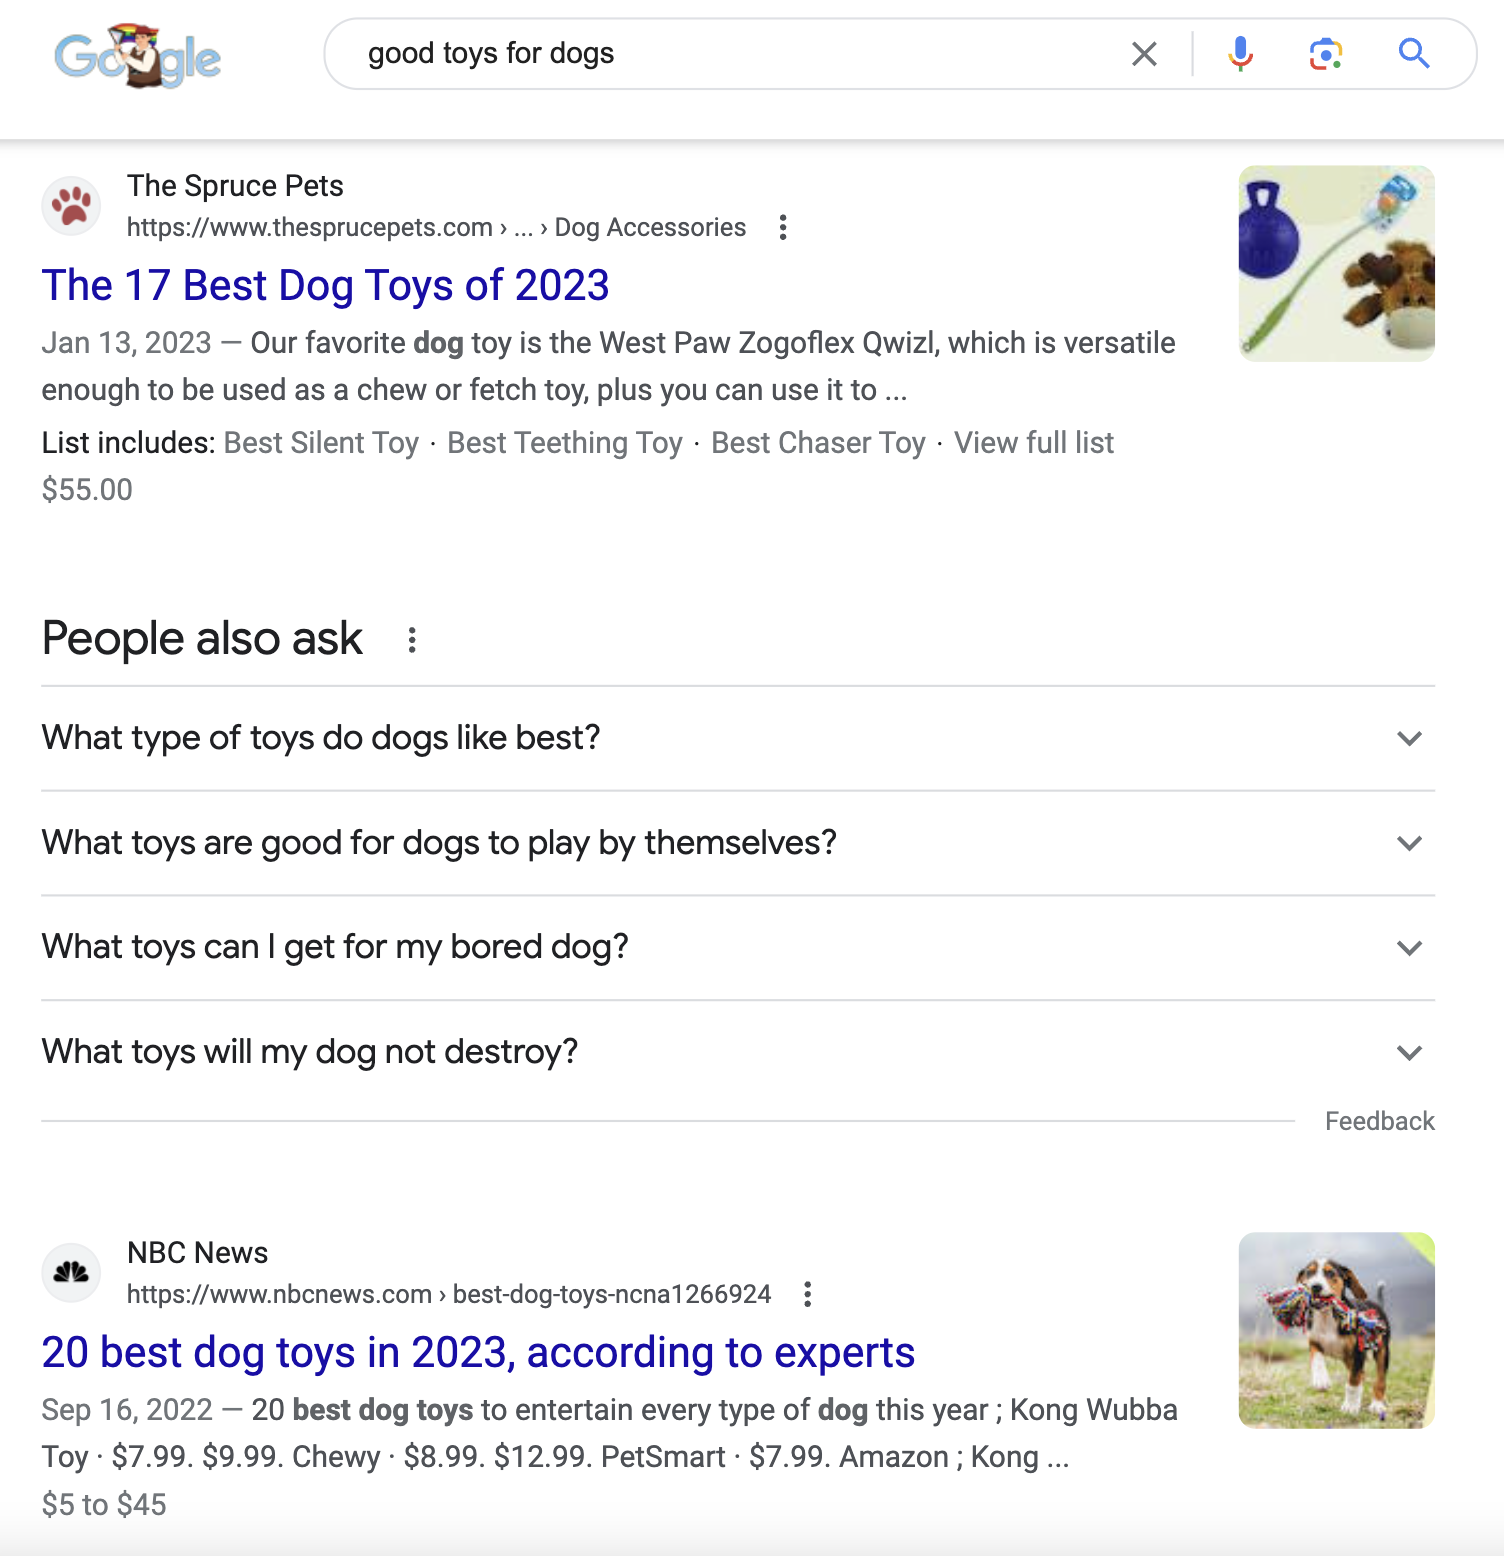 Google results for “good toys for dogs”